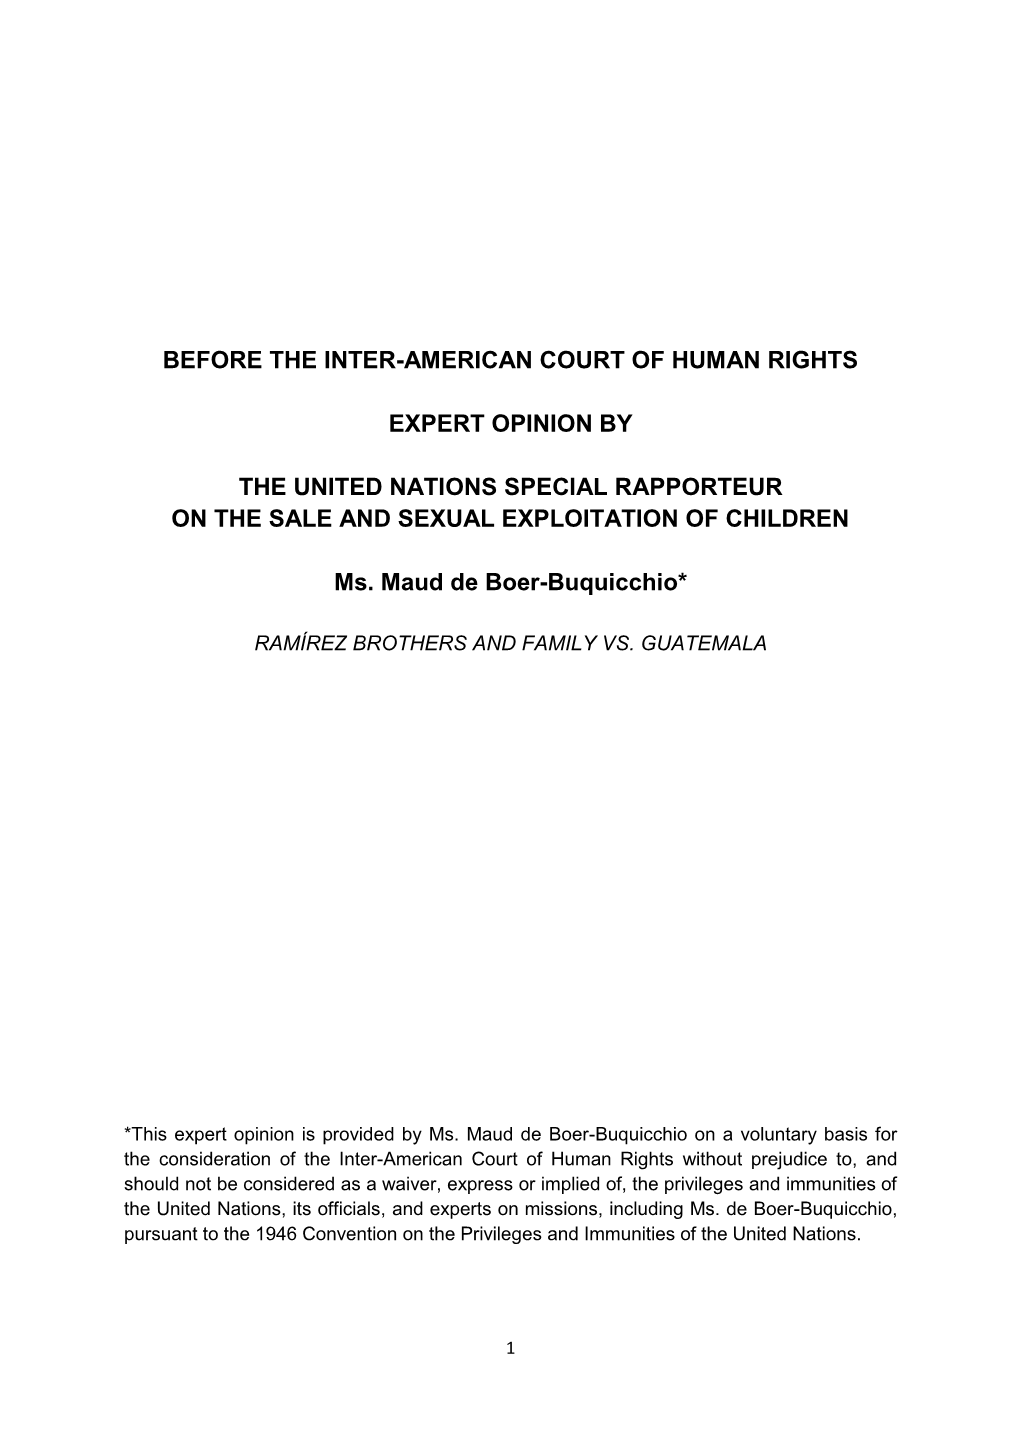 Before the Inter-American Court of Human Rights Expert Opinion by the United Nations Special Rapporteur on the Sale and Sexua